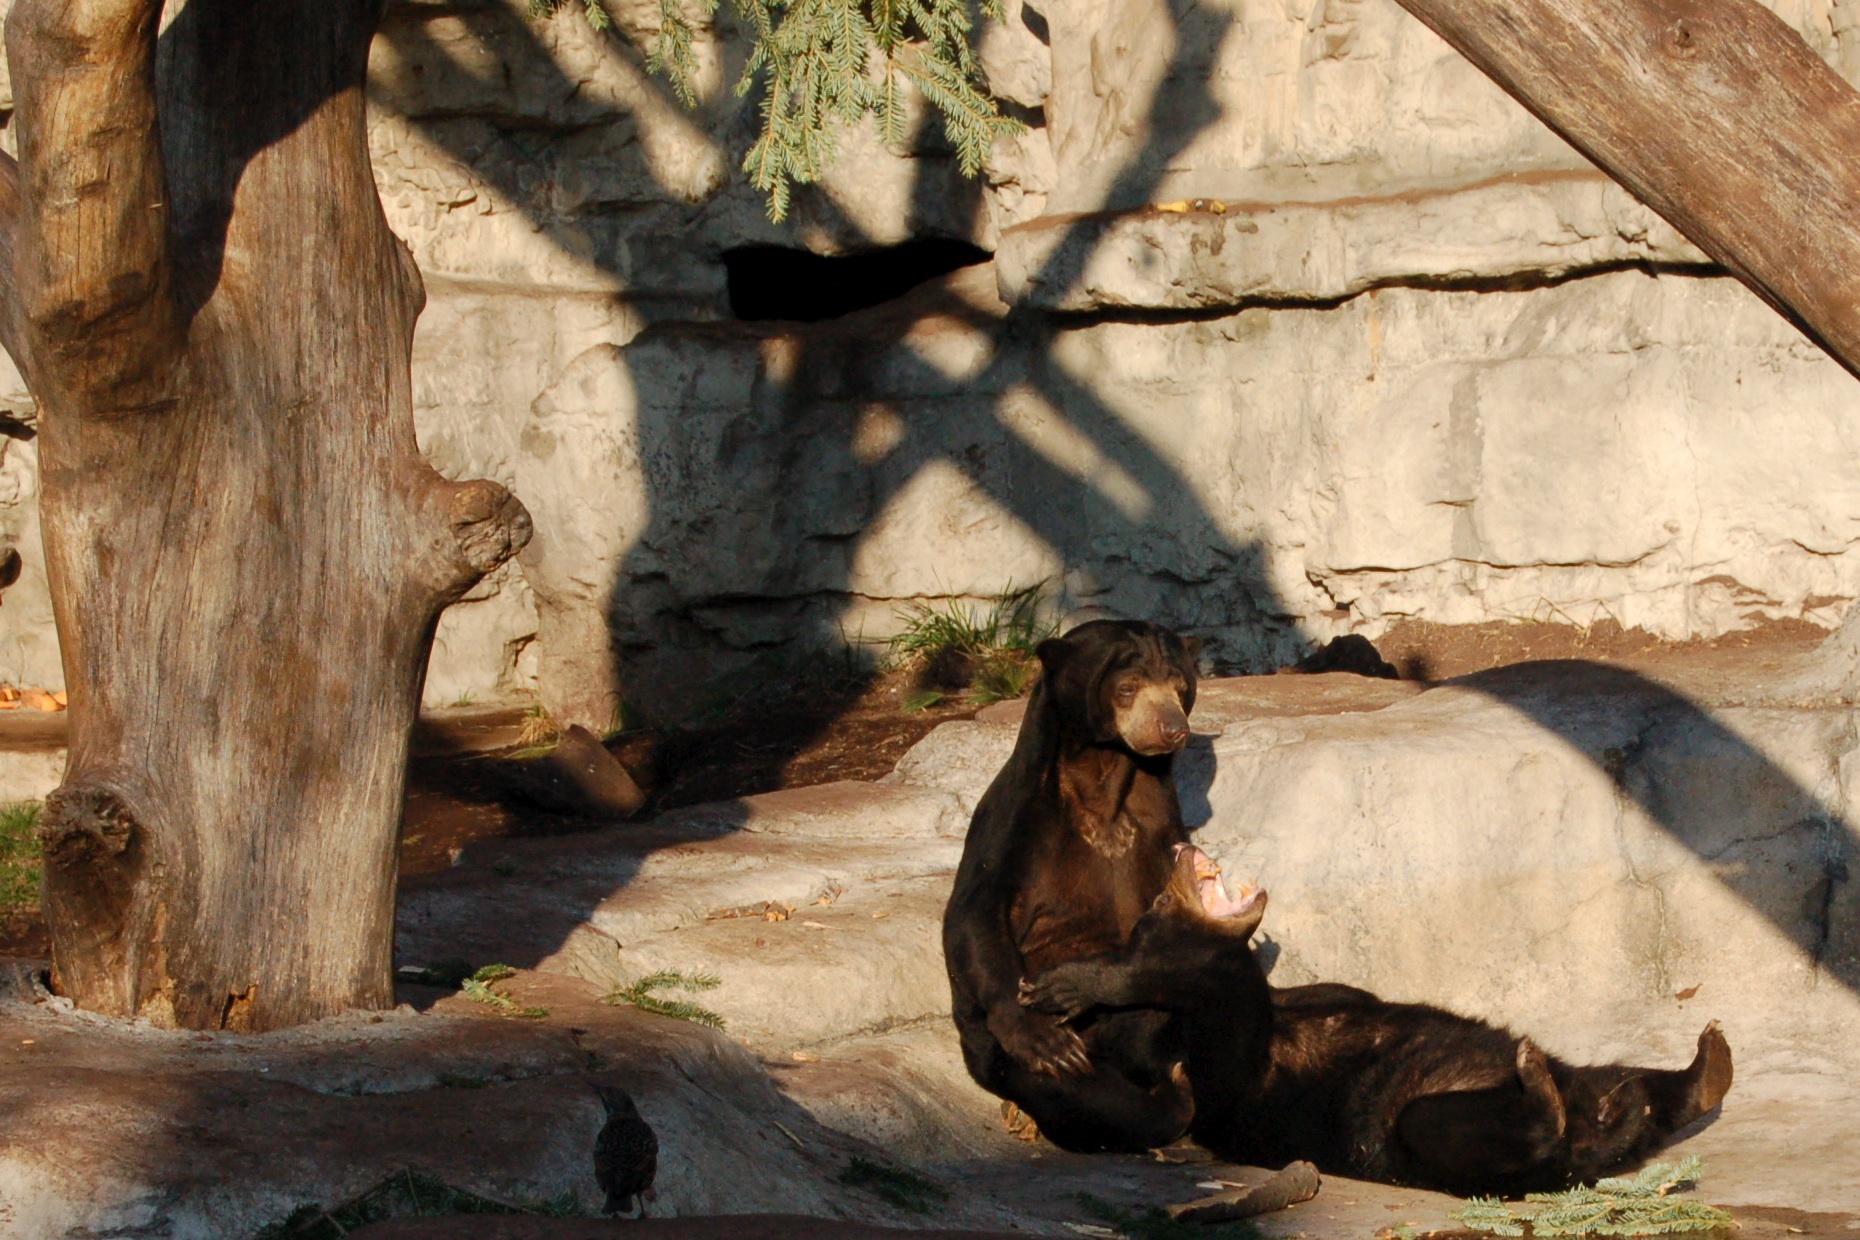 a small animal sitting next to a tree in a zoo enclosure